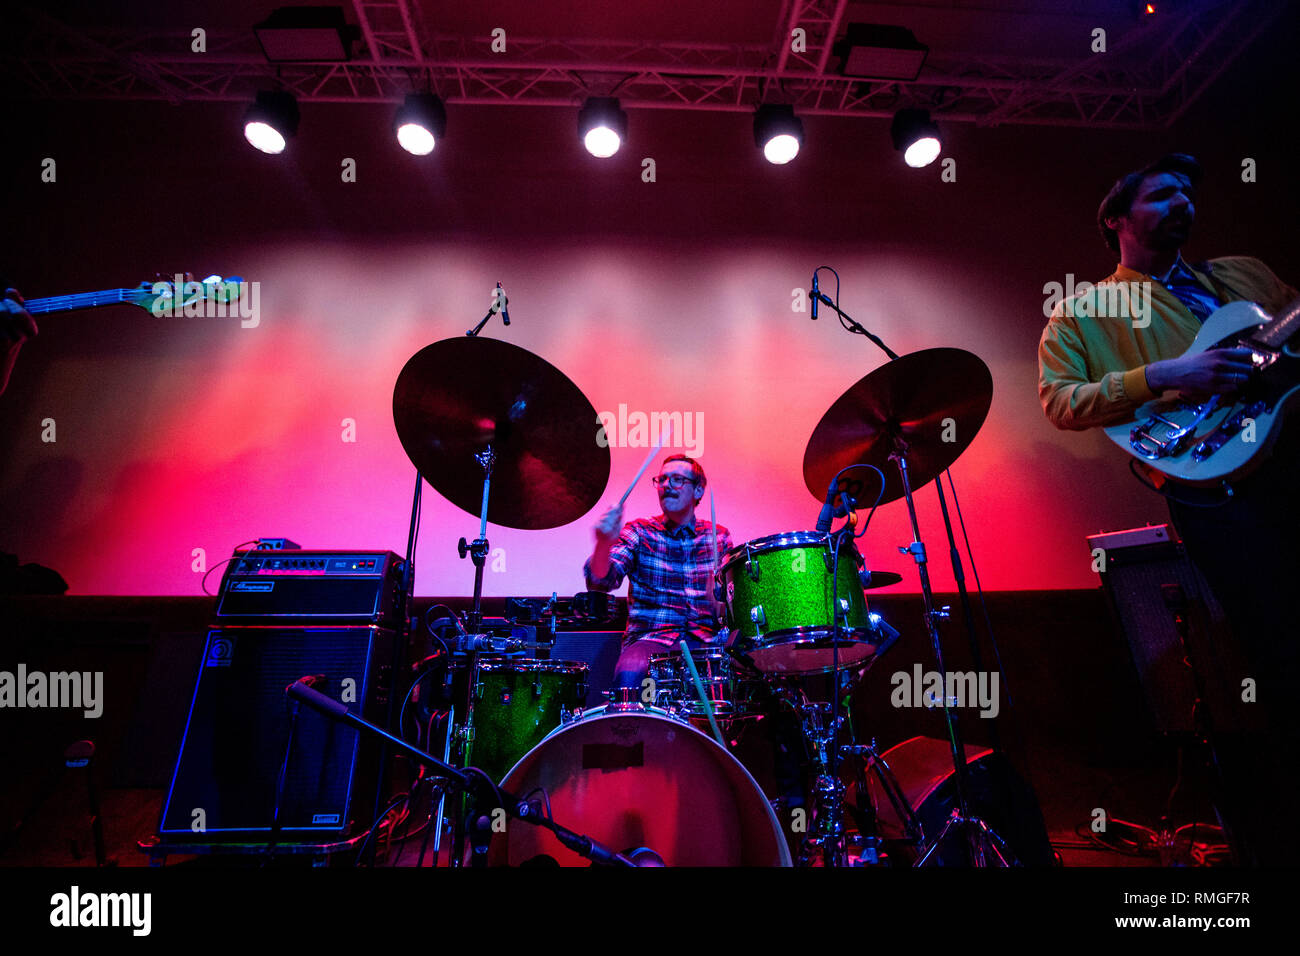 Norway, Bergen - January 1 2019. The Norwegian band Orions Belte performs a  live concert at Landmark in Bergen. Here drummer Kim Åge Furuhaug is seen  live on stage. (Photo credit: Gonzales